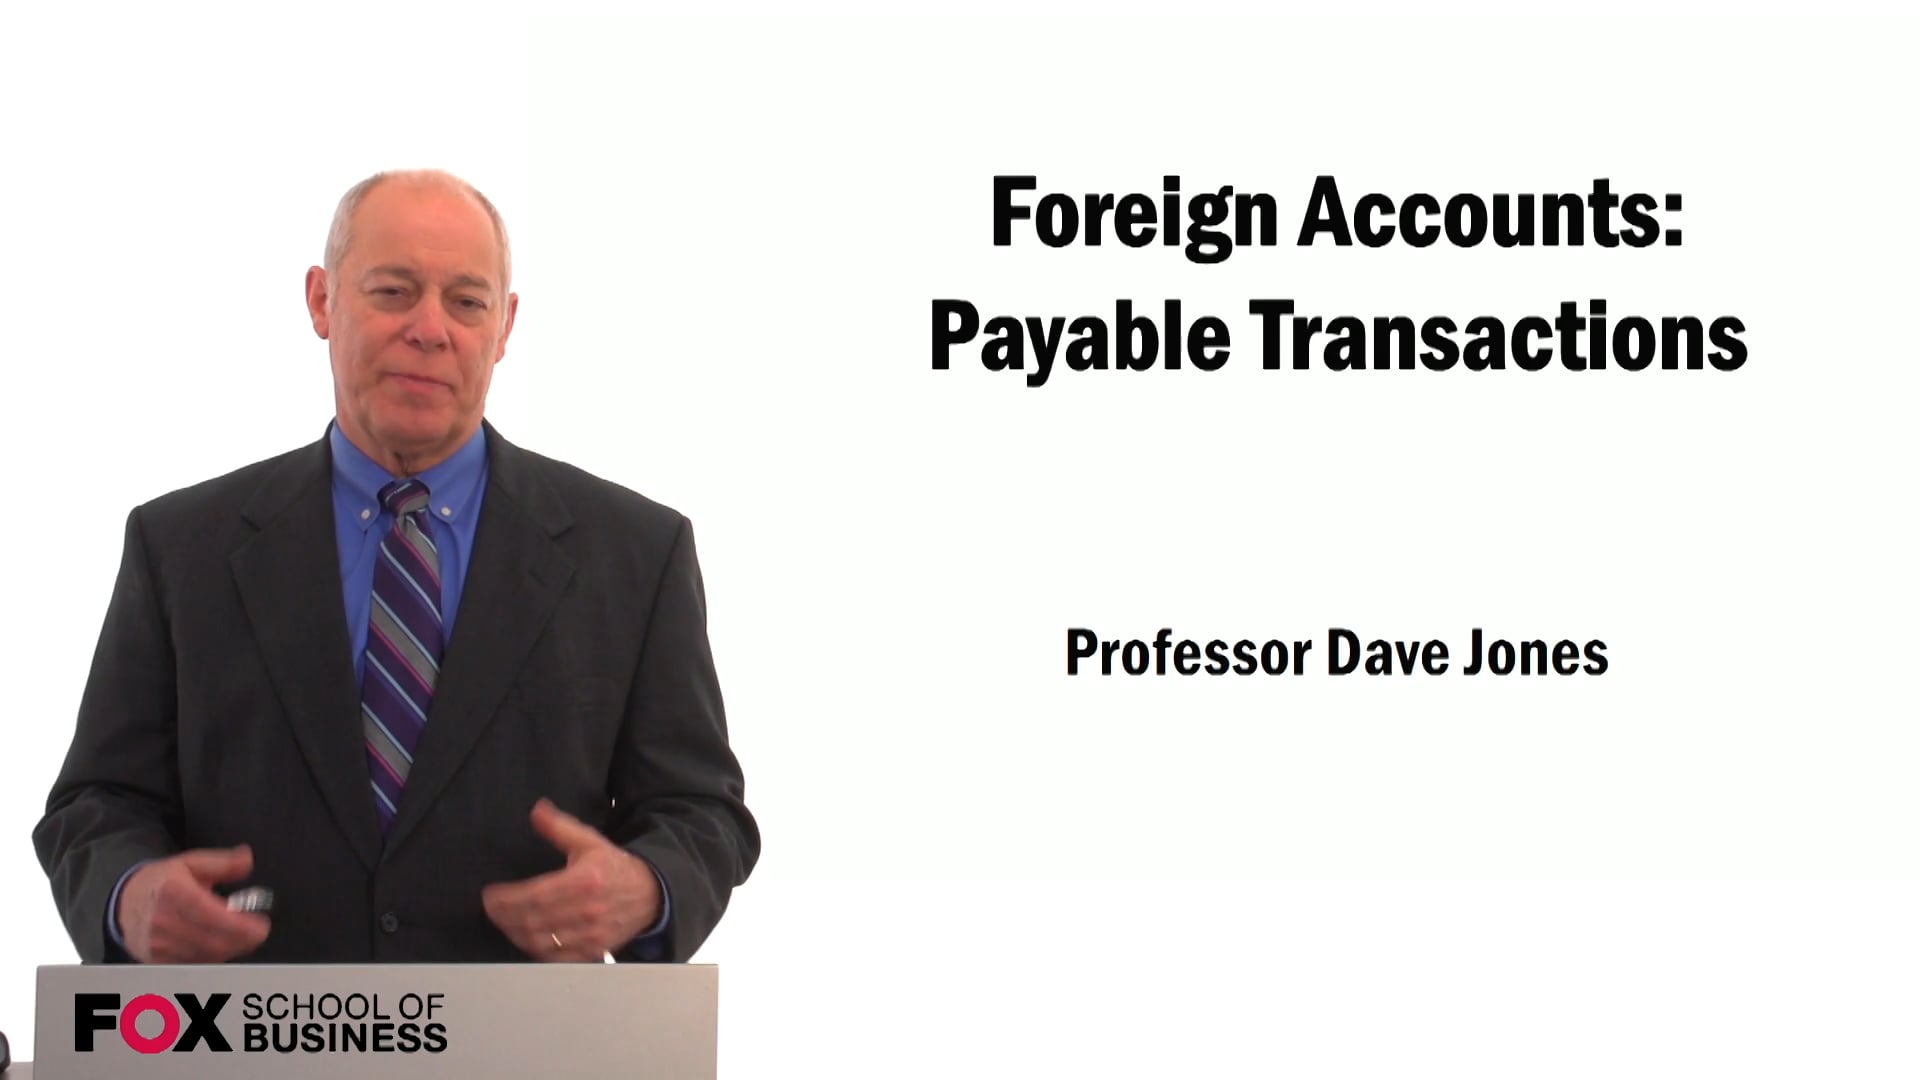 Foreign Accounts: Payable Transactions